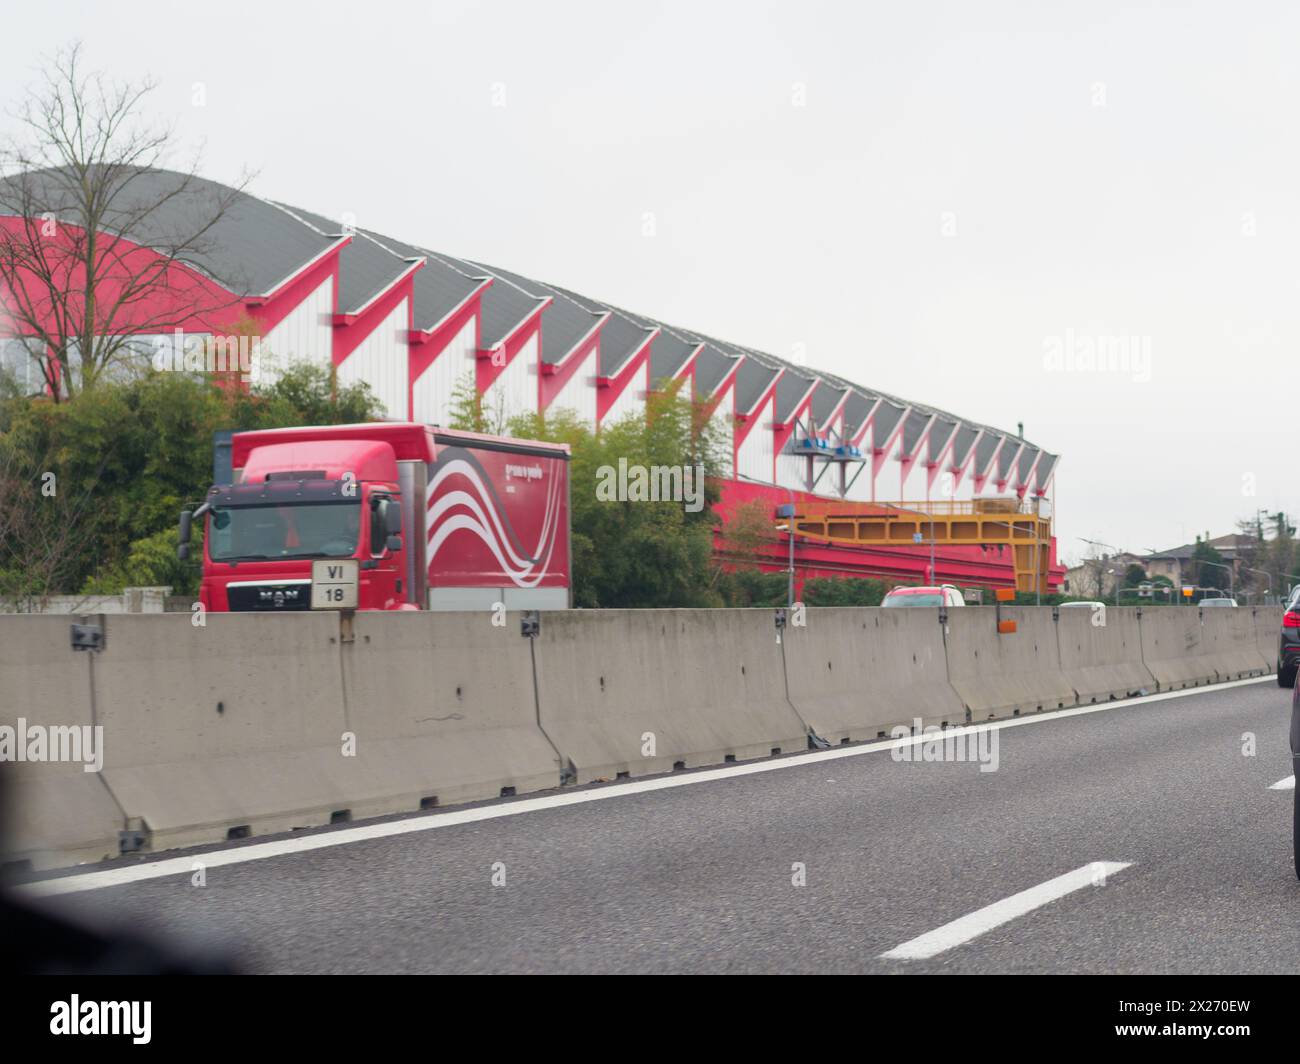 Milan, Italy - April 26th 2023 Circulating on a highway under cloudy conditions, A1 A8 highway near Milan, Italy Stock Photo